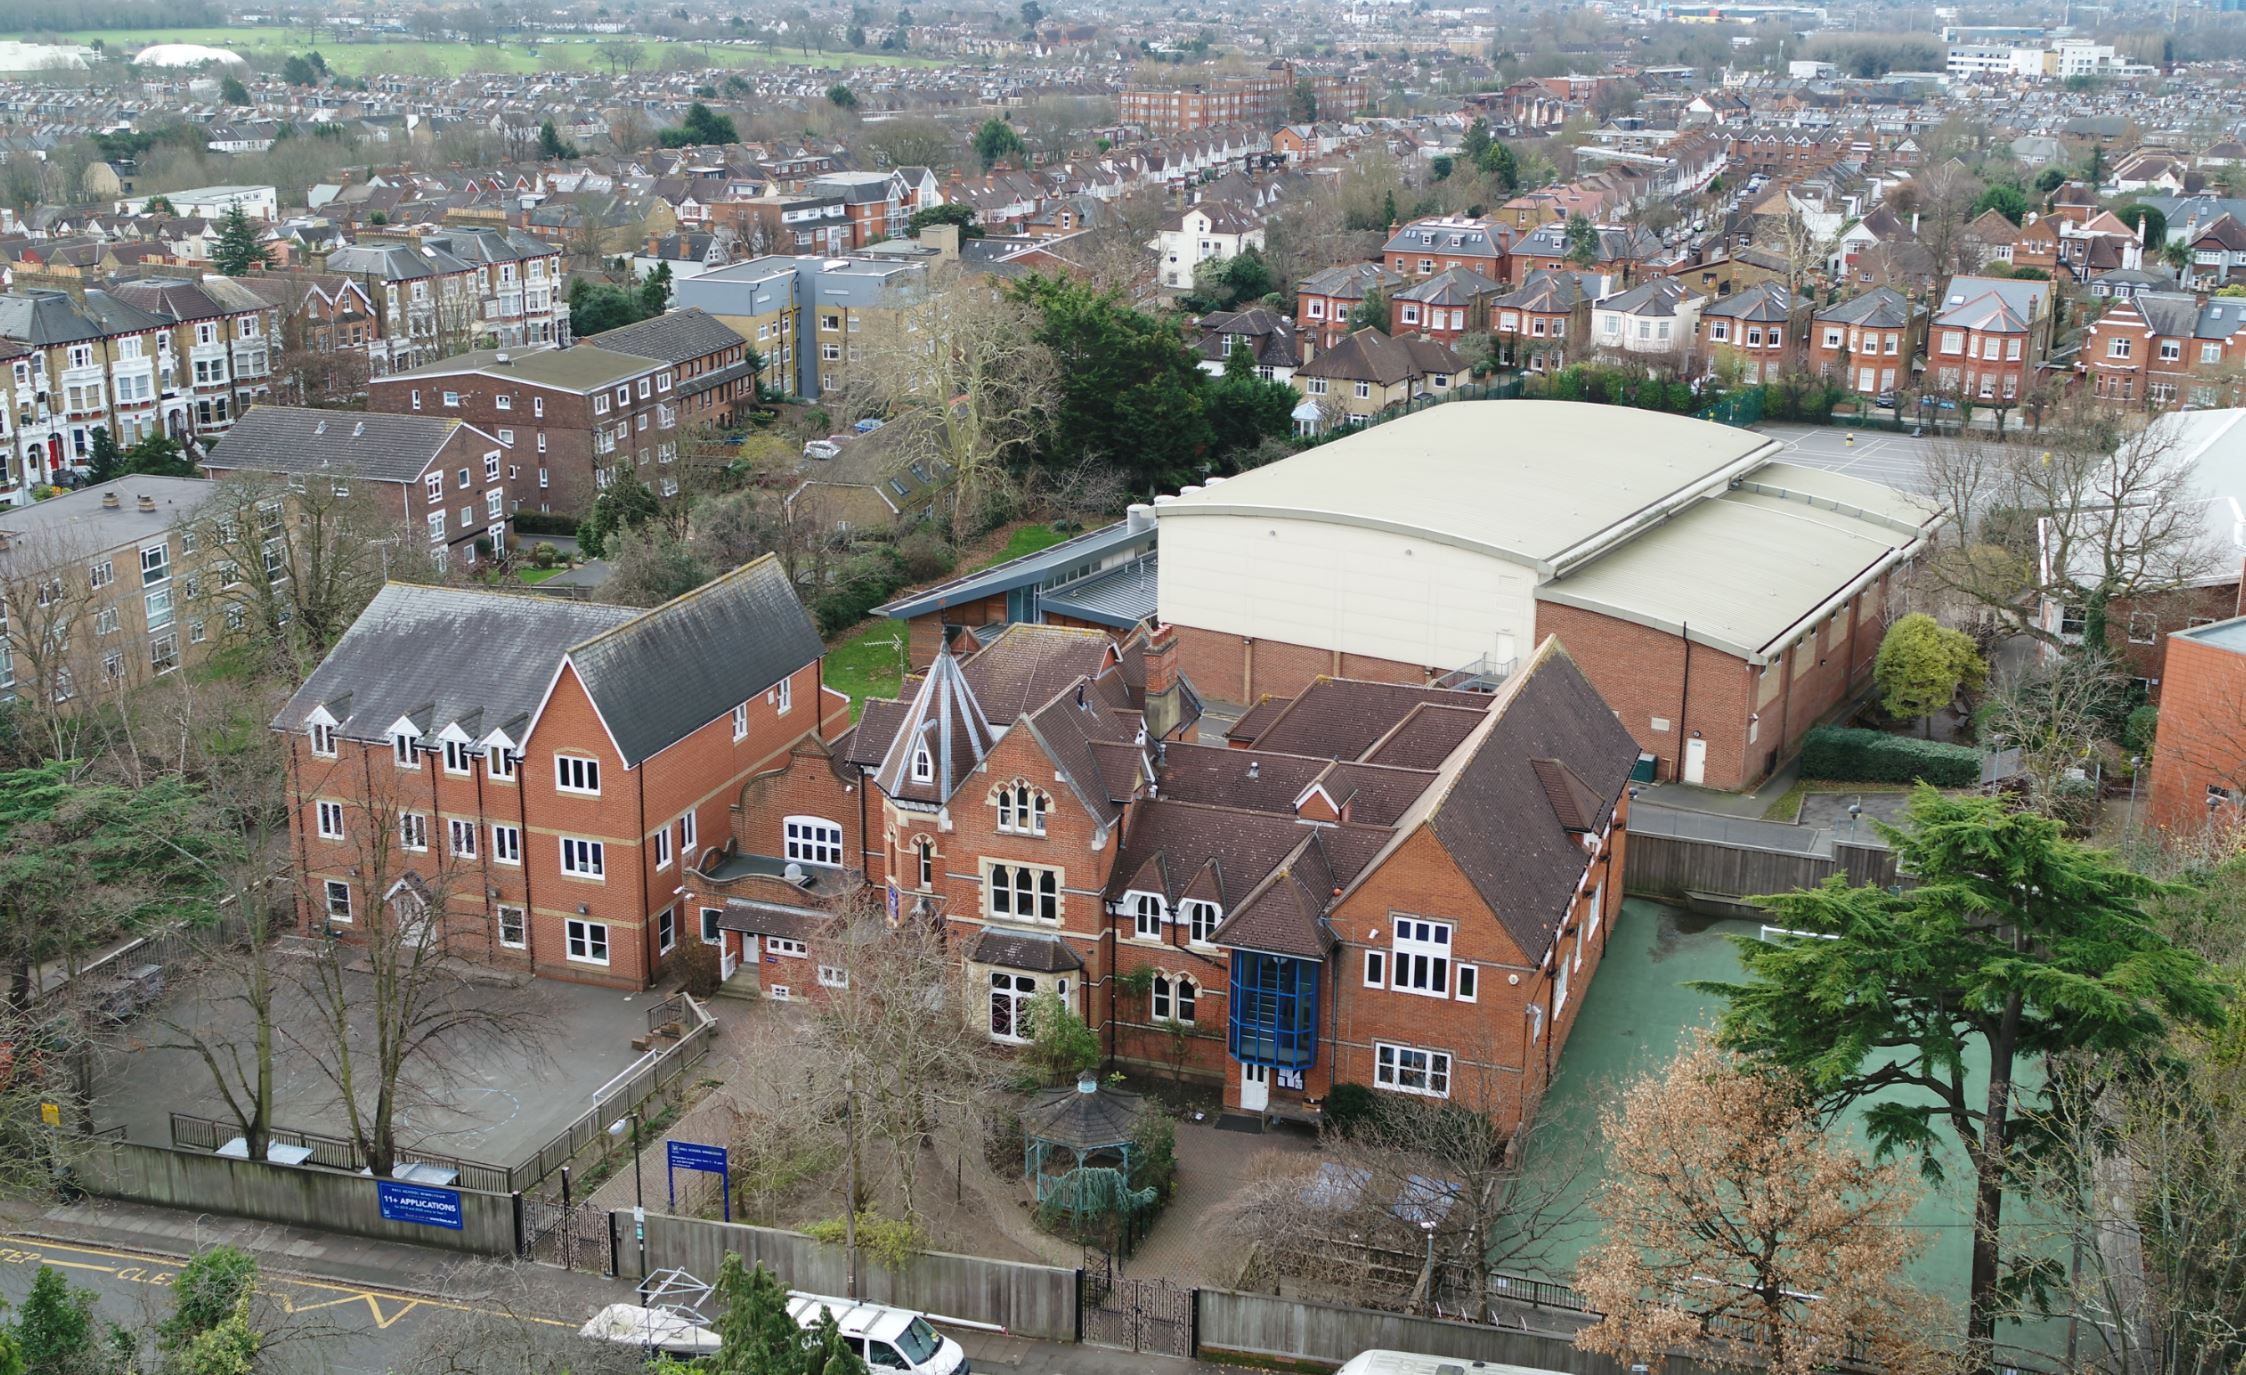 Sale and leaseback of school with additional playing fields